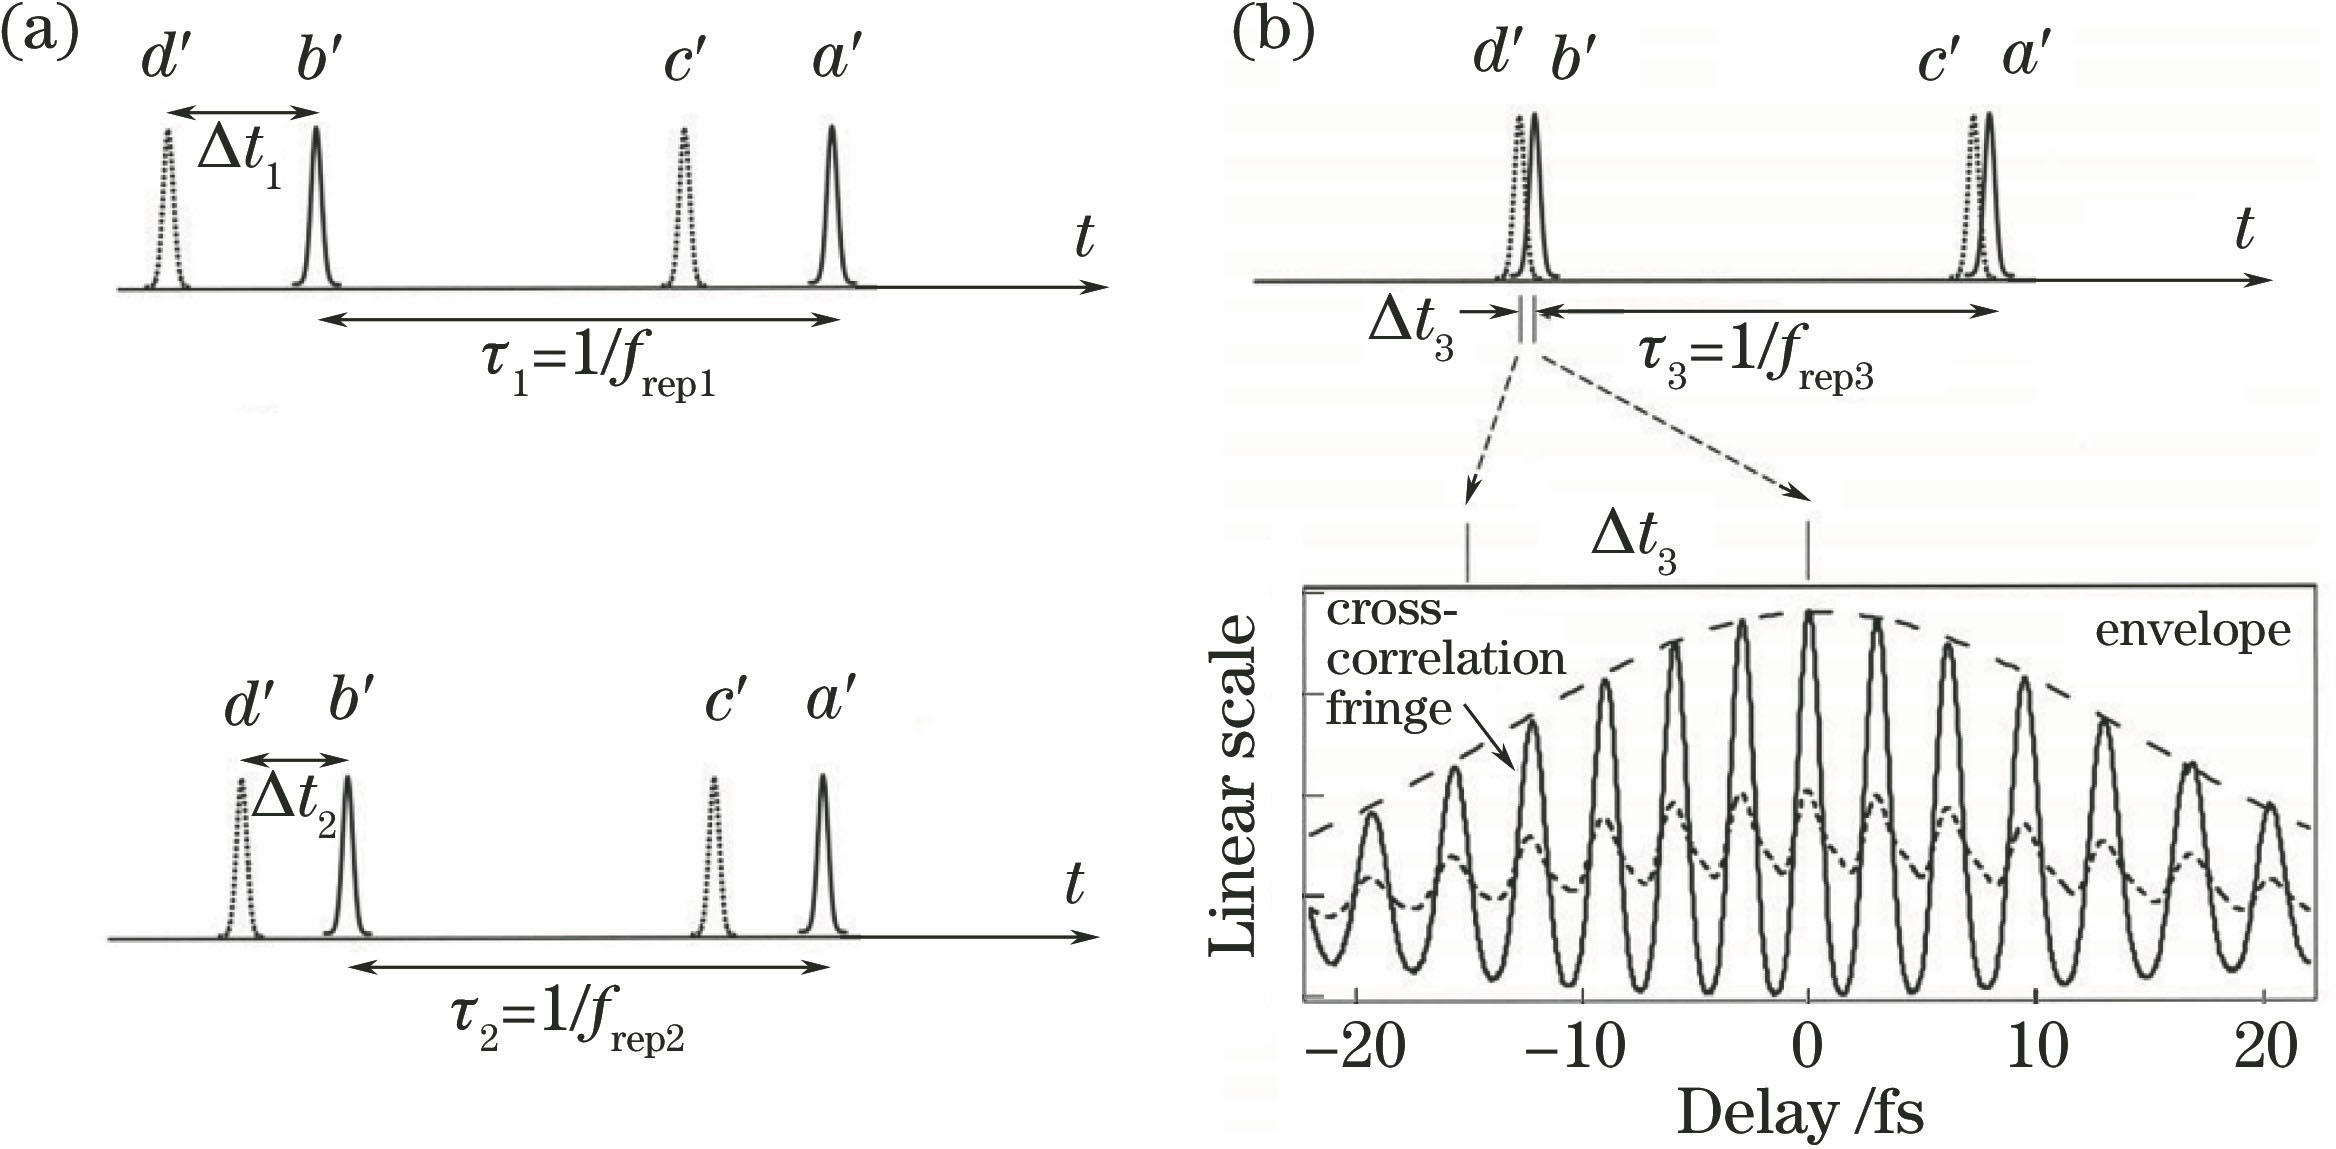 Schematic of distance measurement based on femtosecond pulse cross-correlation. (a) Coarse measurement based on rapid time of flight; (b) fine measurement based on cross correlation fringes